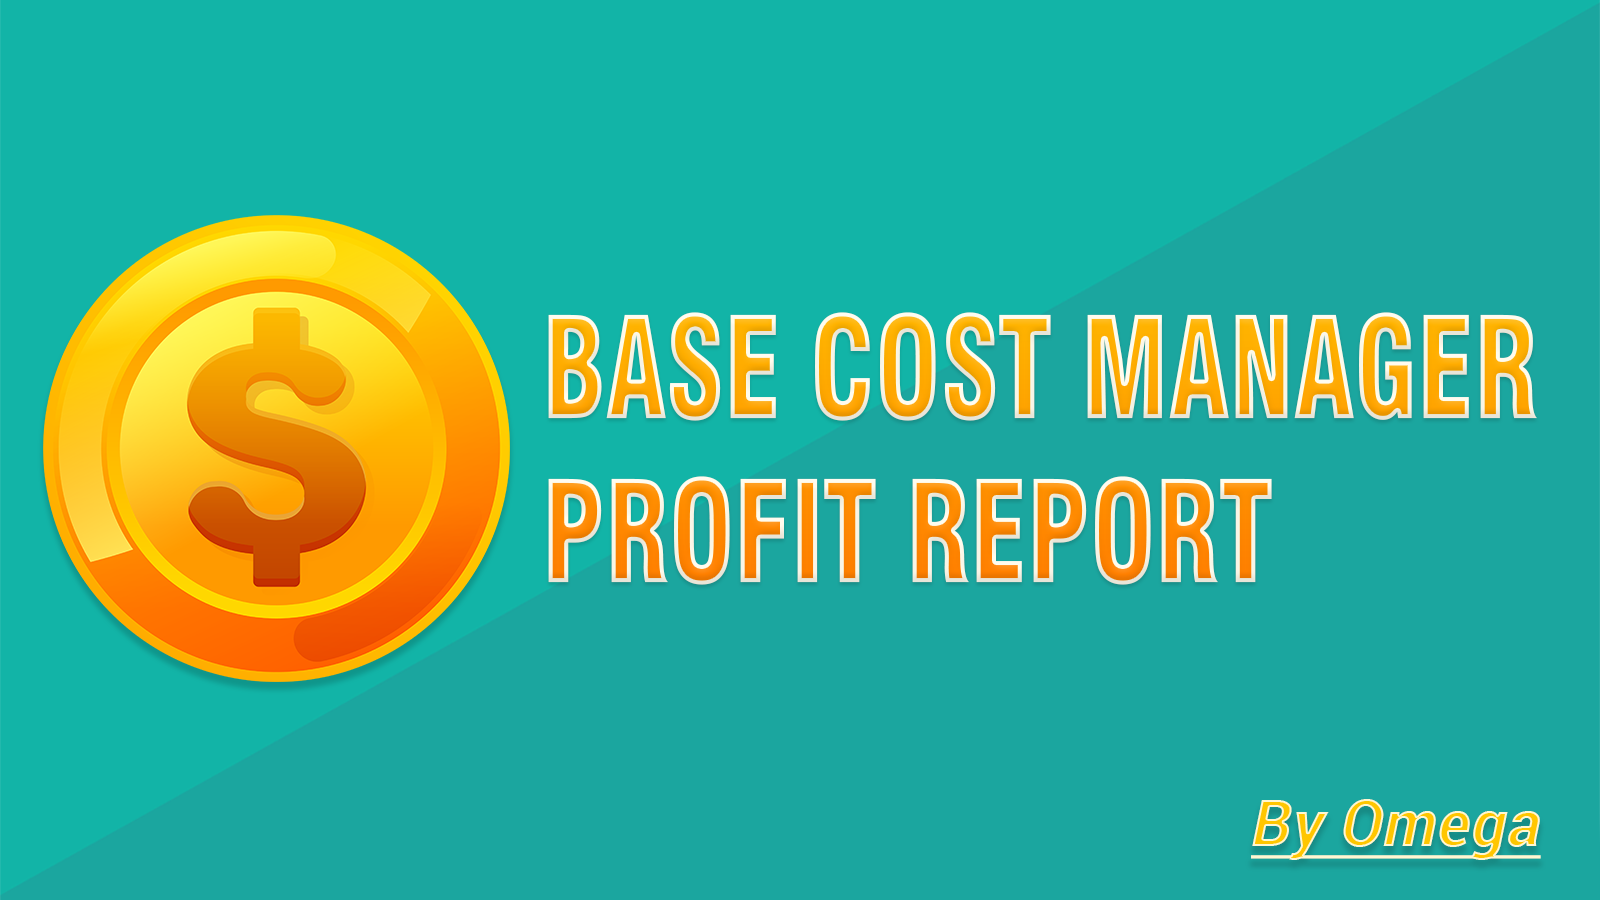 Basecost manager profit report